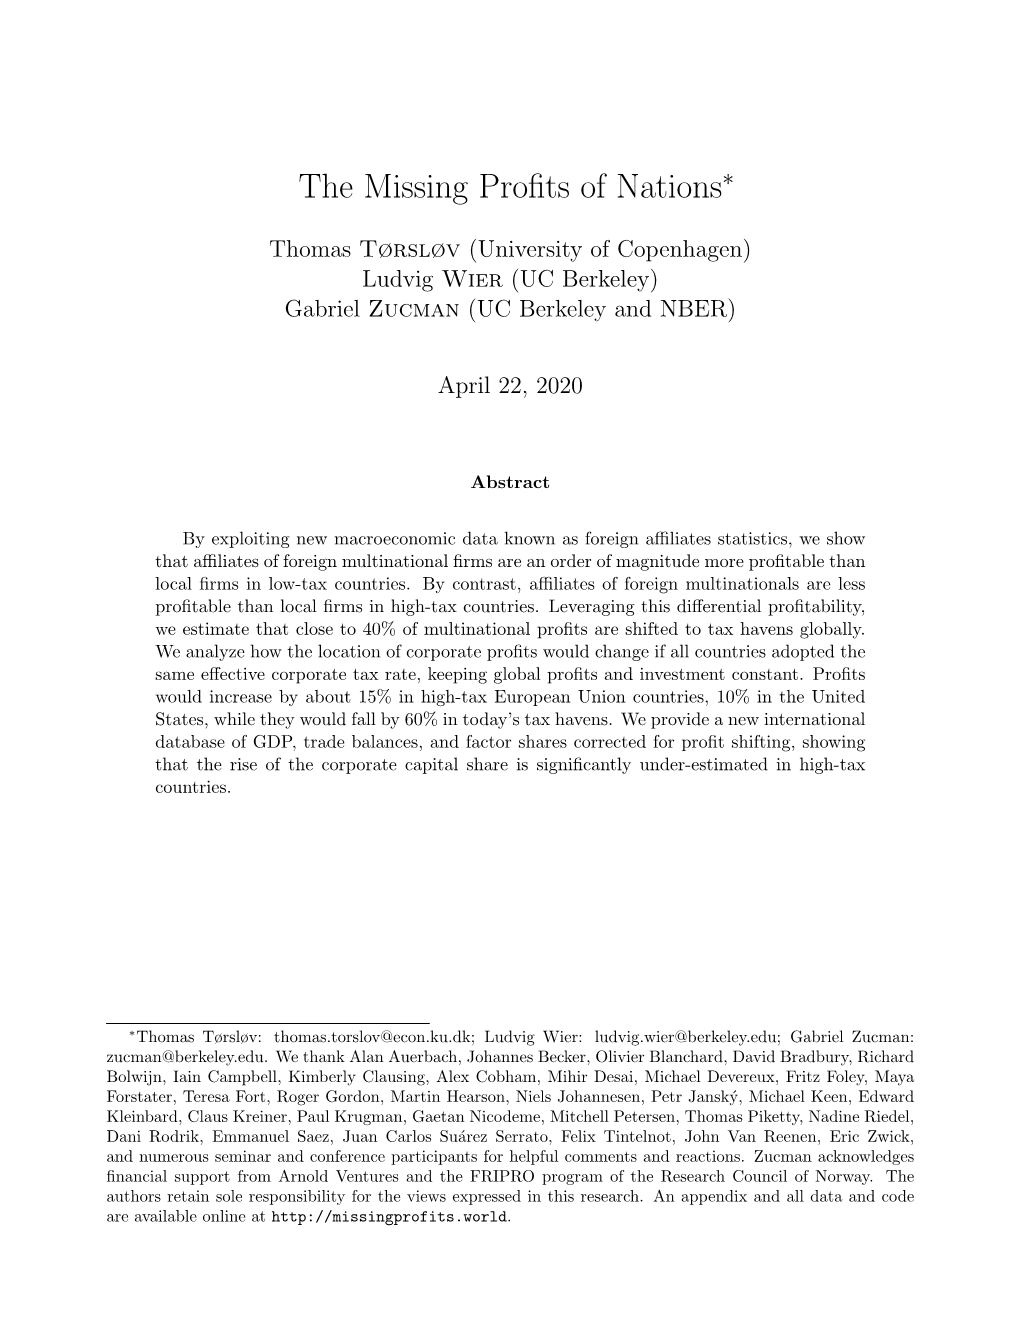 The Missing Profits of Nations